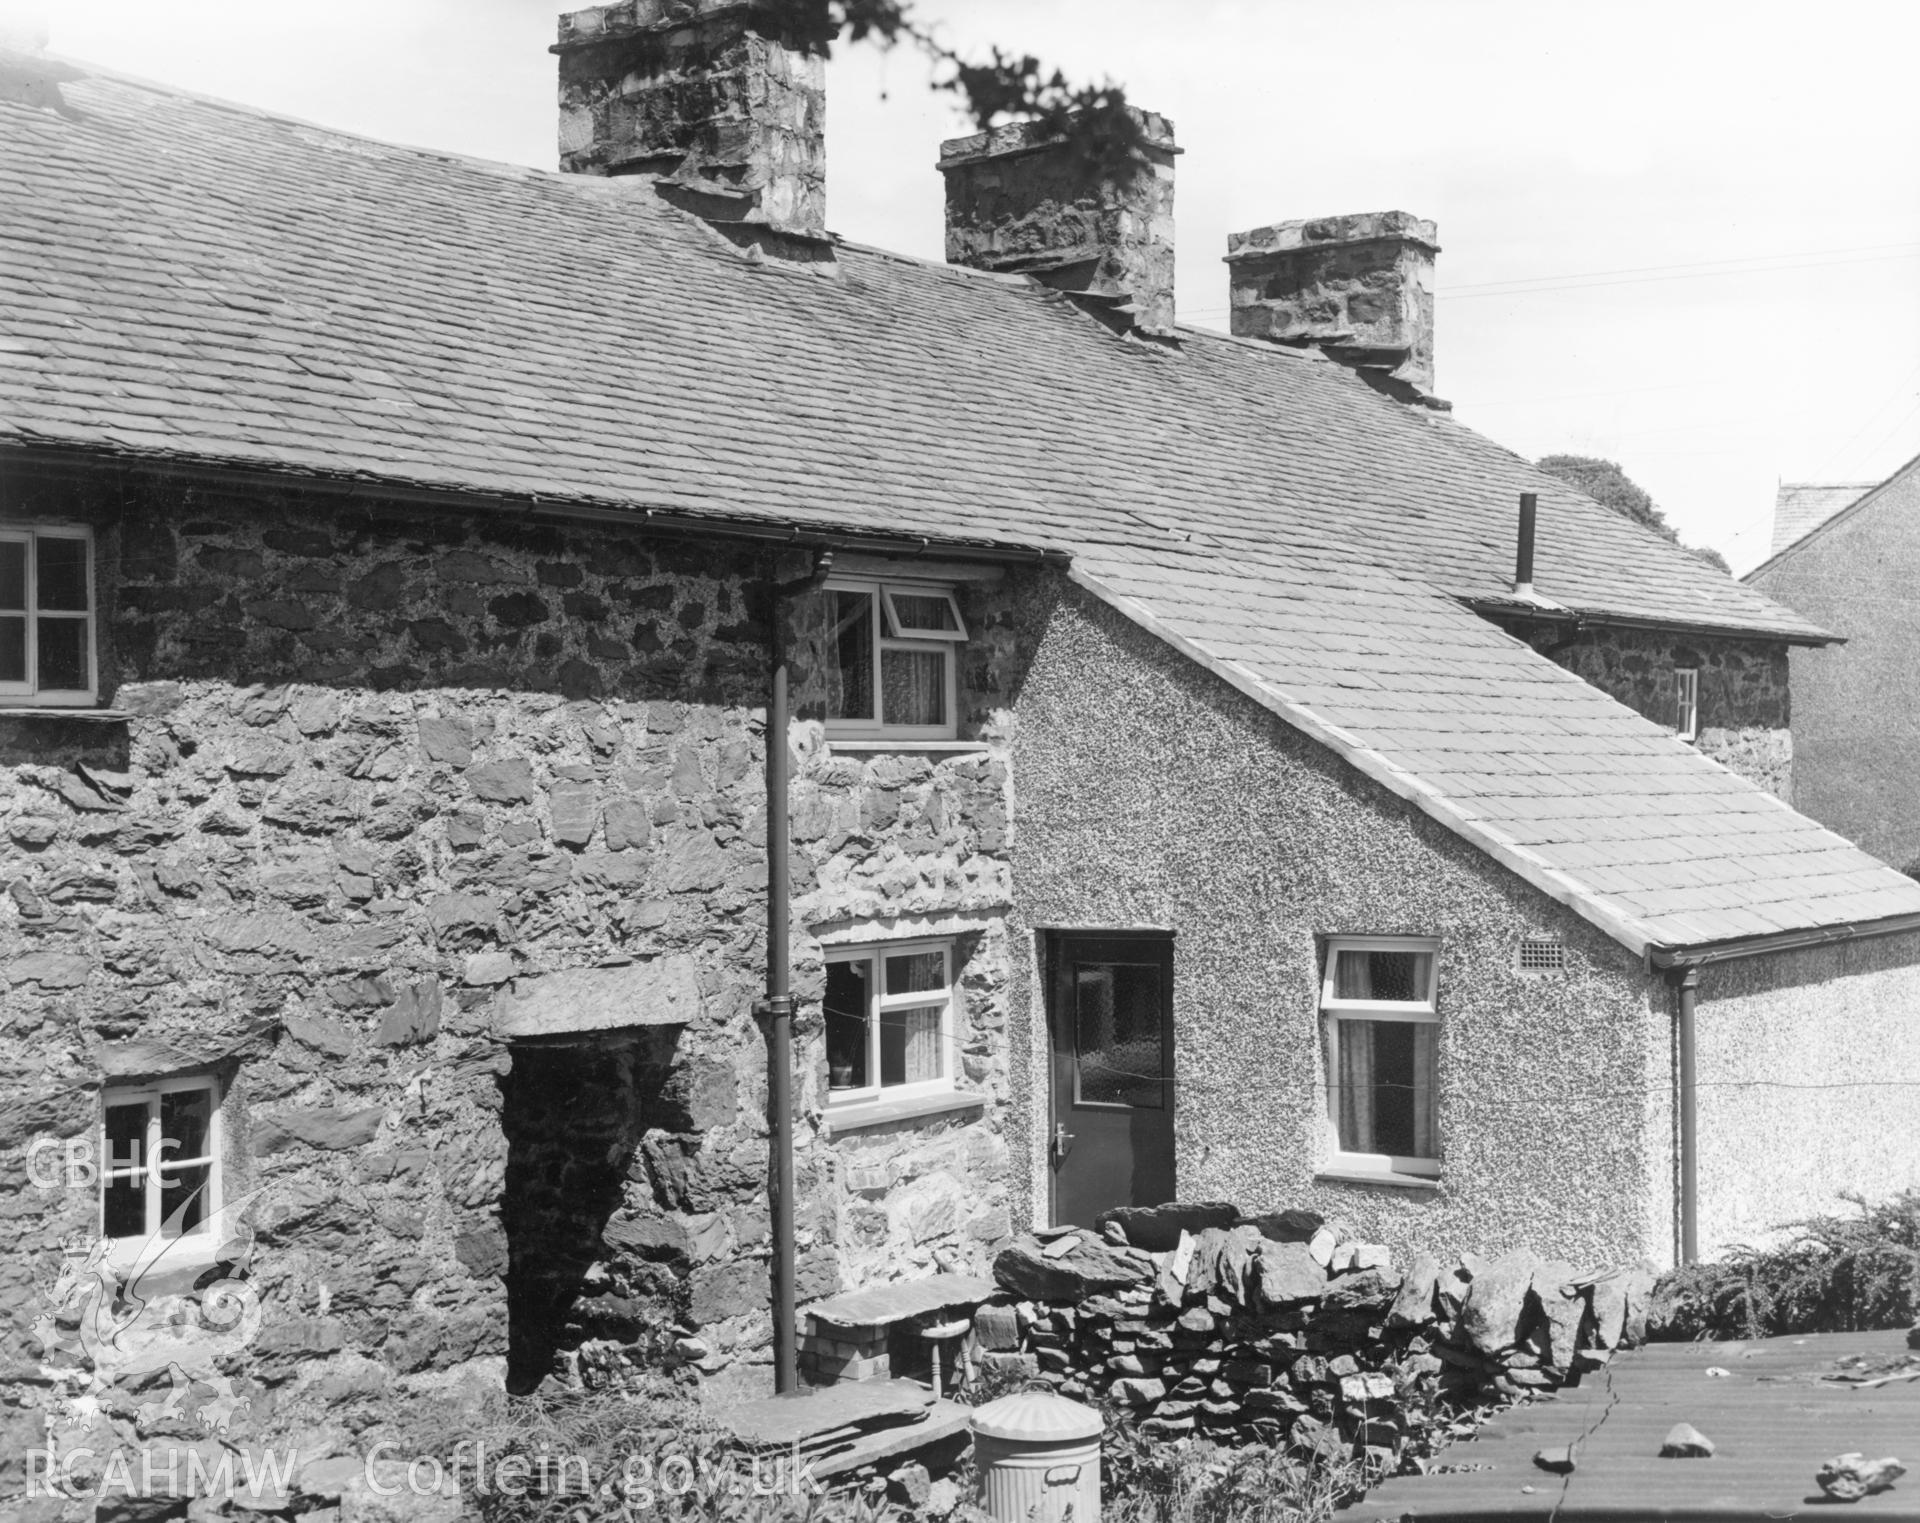 1 b/w print showing exterior of house on High Street, Ysbyty Ifan (showing new rear extension and new windows), used as an illustration of the Housing Improvement Grant scheme for exhibitions held at Ministry of Housing stands at agricultural shows (1960); collated by the former Central Office of Information.